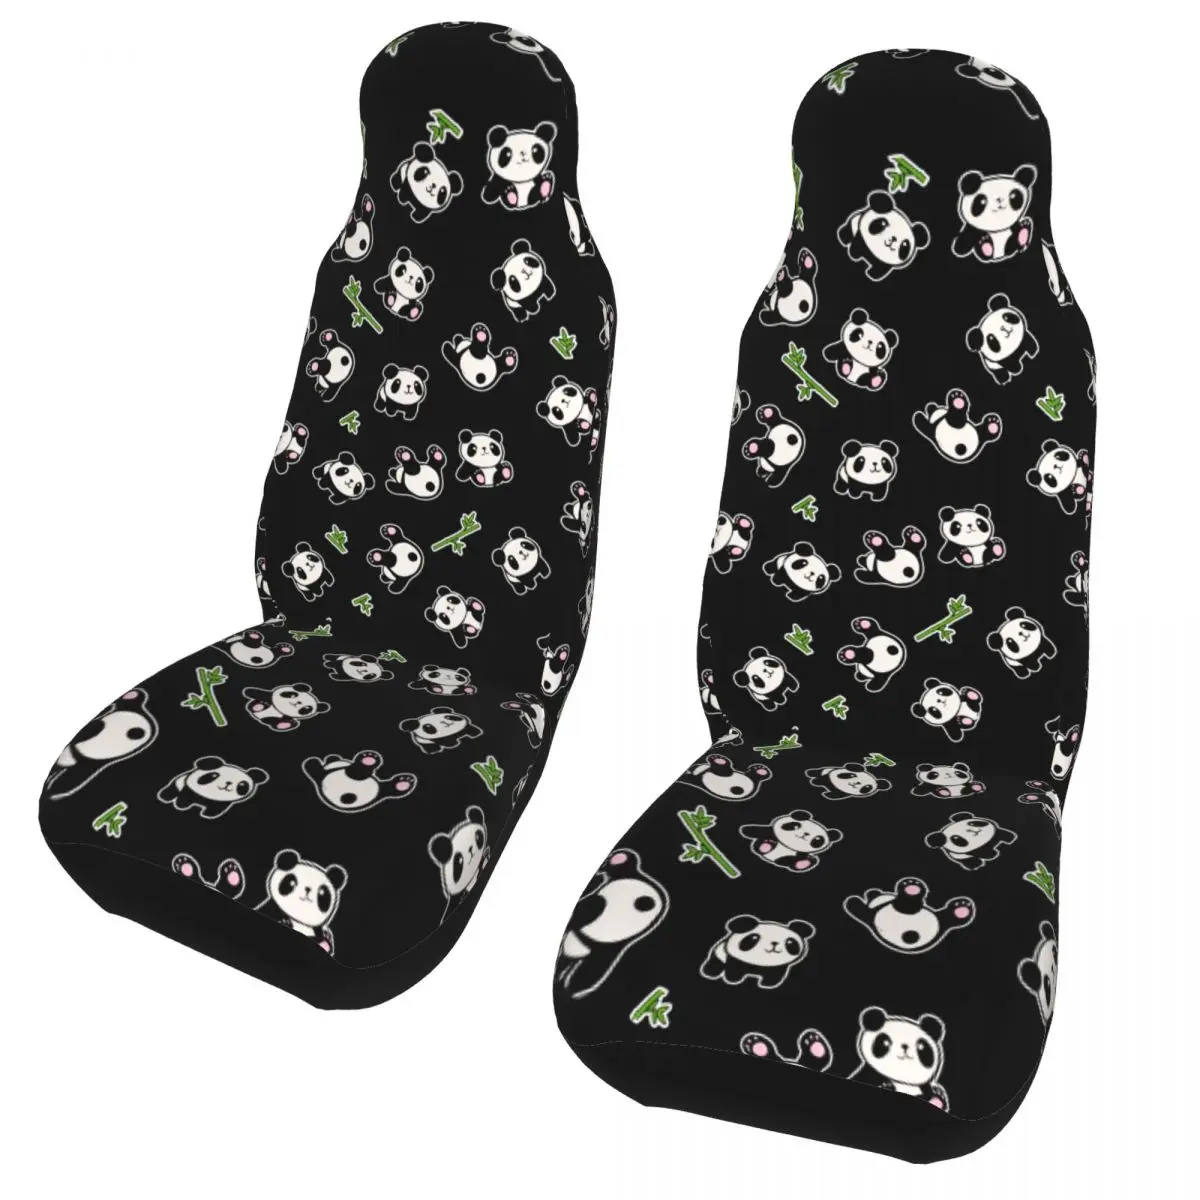 

Panda Car Seat Cover Protector Interior Accessories AUTOYOUTH Cartoon Animal Front Rear Flocking Cloth Cushion Fiber Hunting